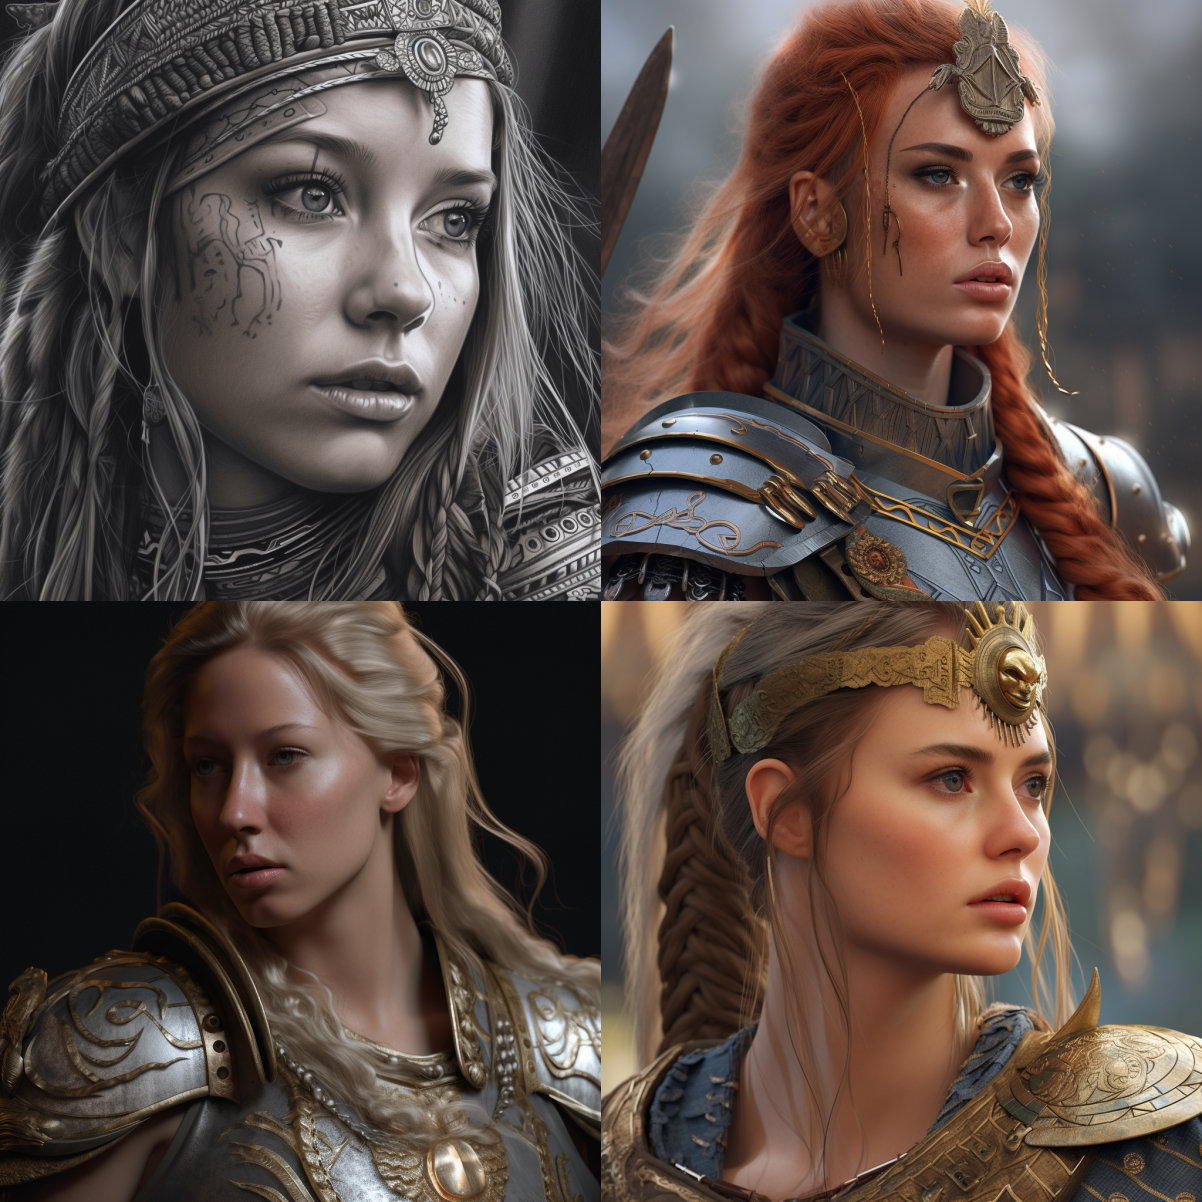 verstaerker_something_with_Warrior_Princess__photorealistic_ad2d626f-db67-457c-a7a0-830512c10f1e.png